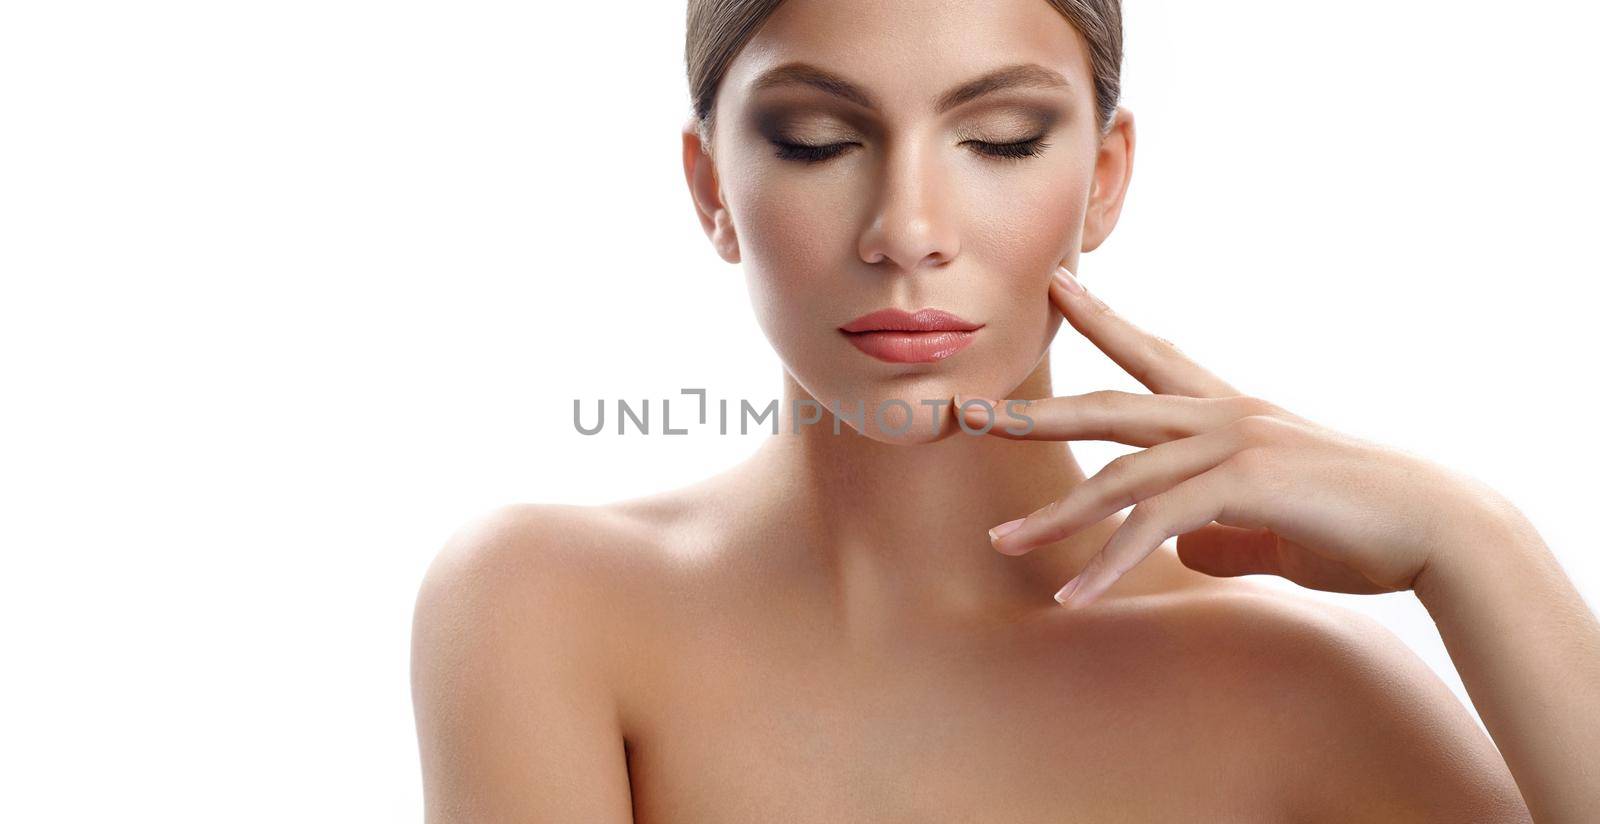 Calm and peace. Cropped horizontal studio portrait of a gorgeous young woman posing with her eyes closed touching her face perfect skin skincare face facial treatment procedure unblemished copyspace